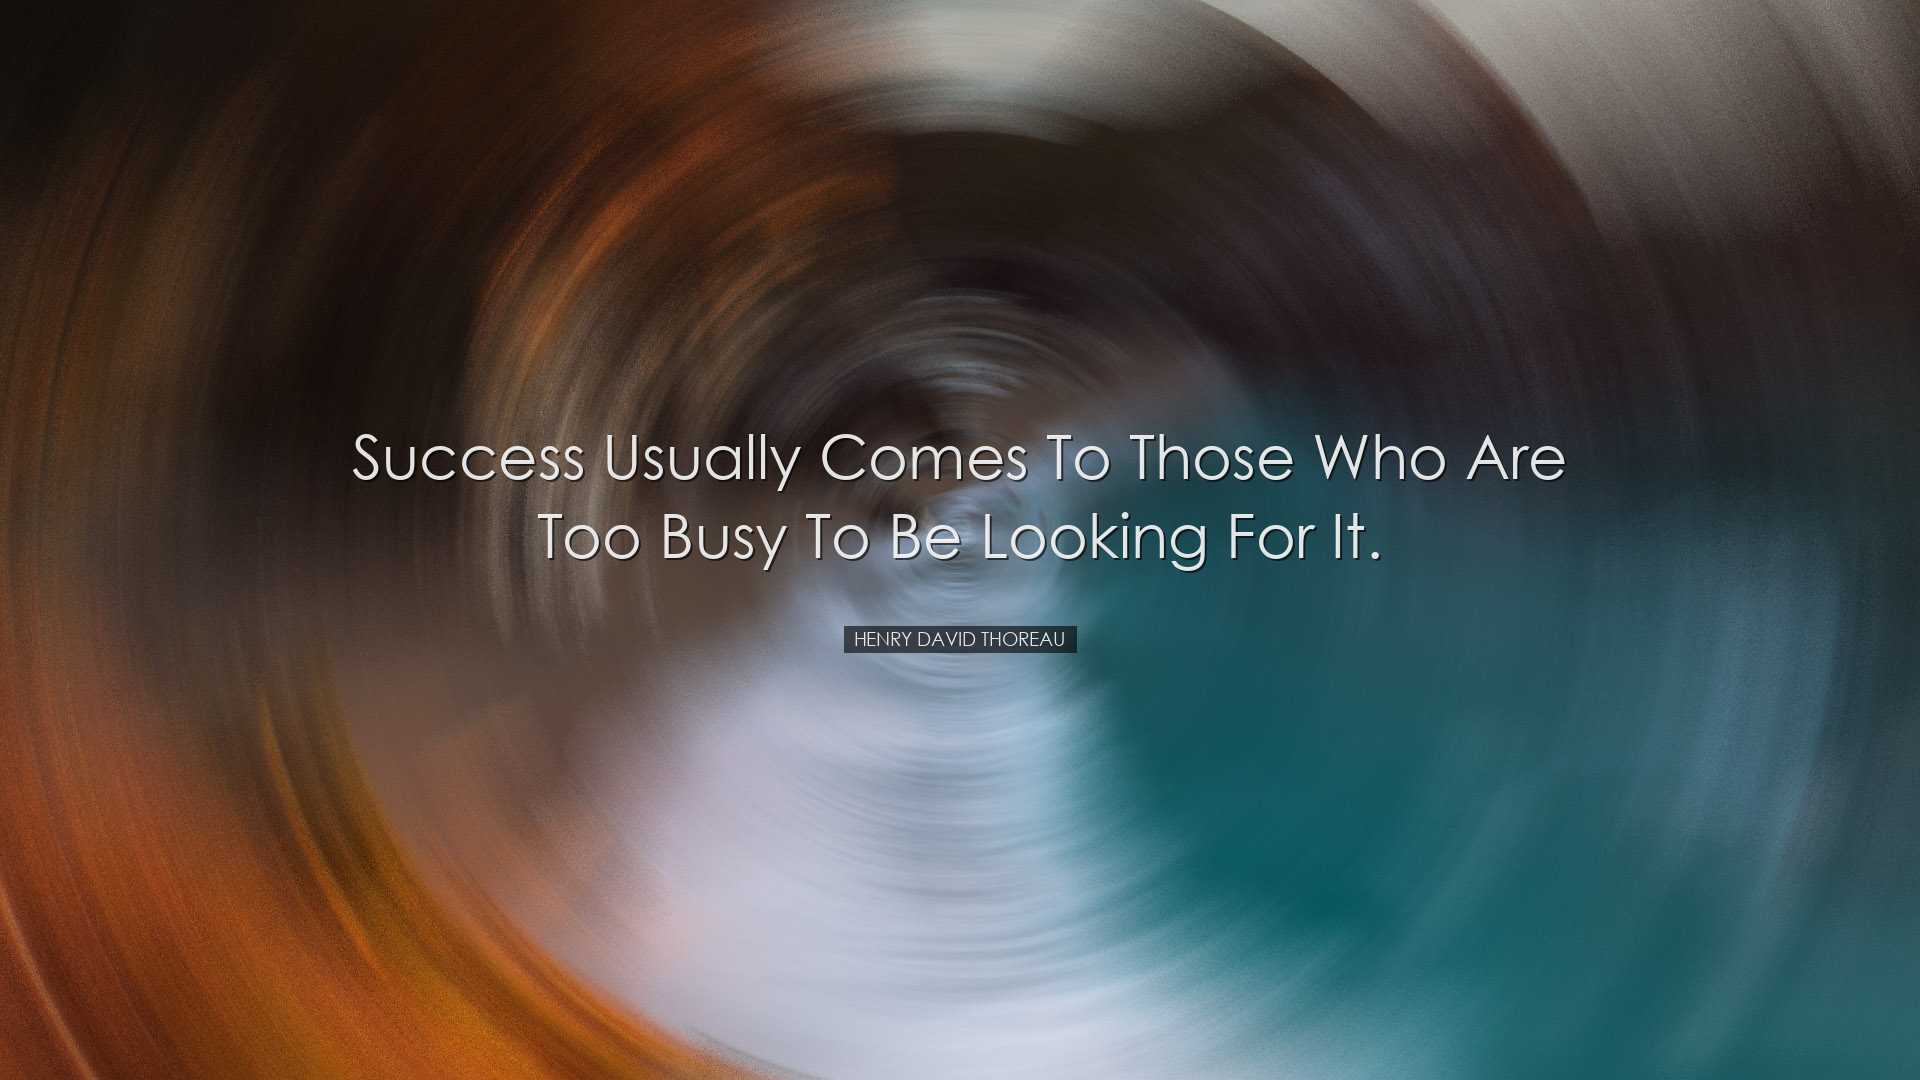 Success usually comes to those who are too busy to be looking for